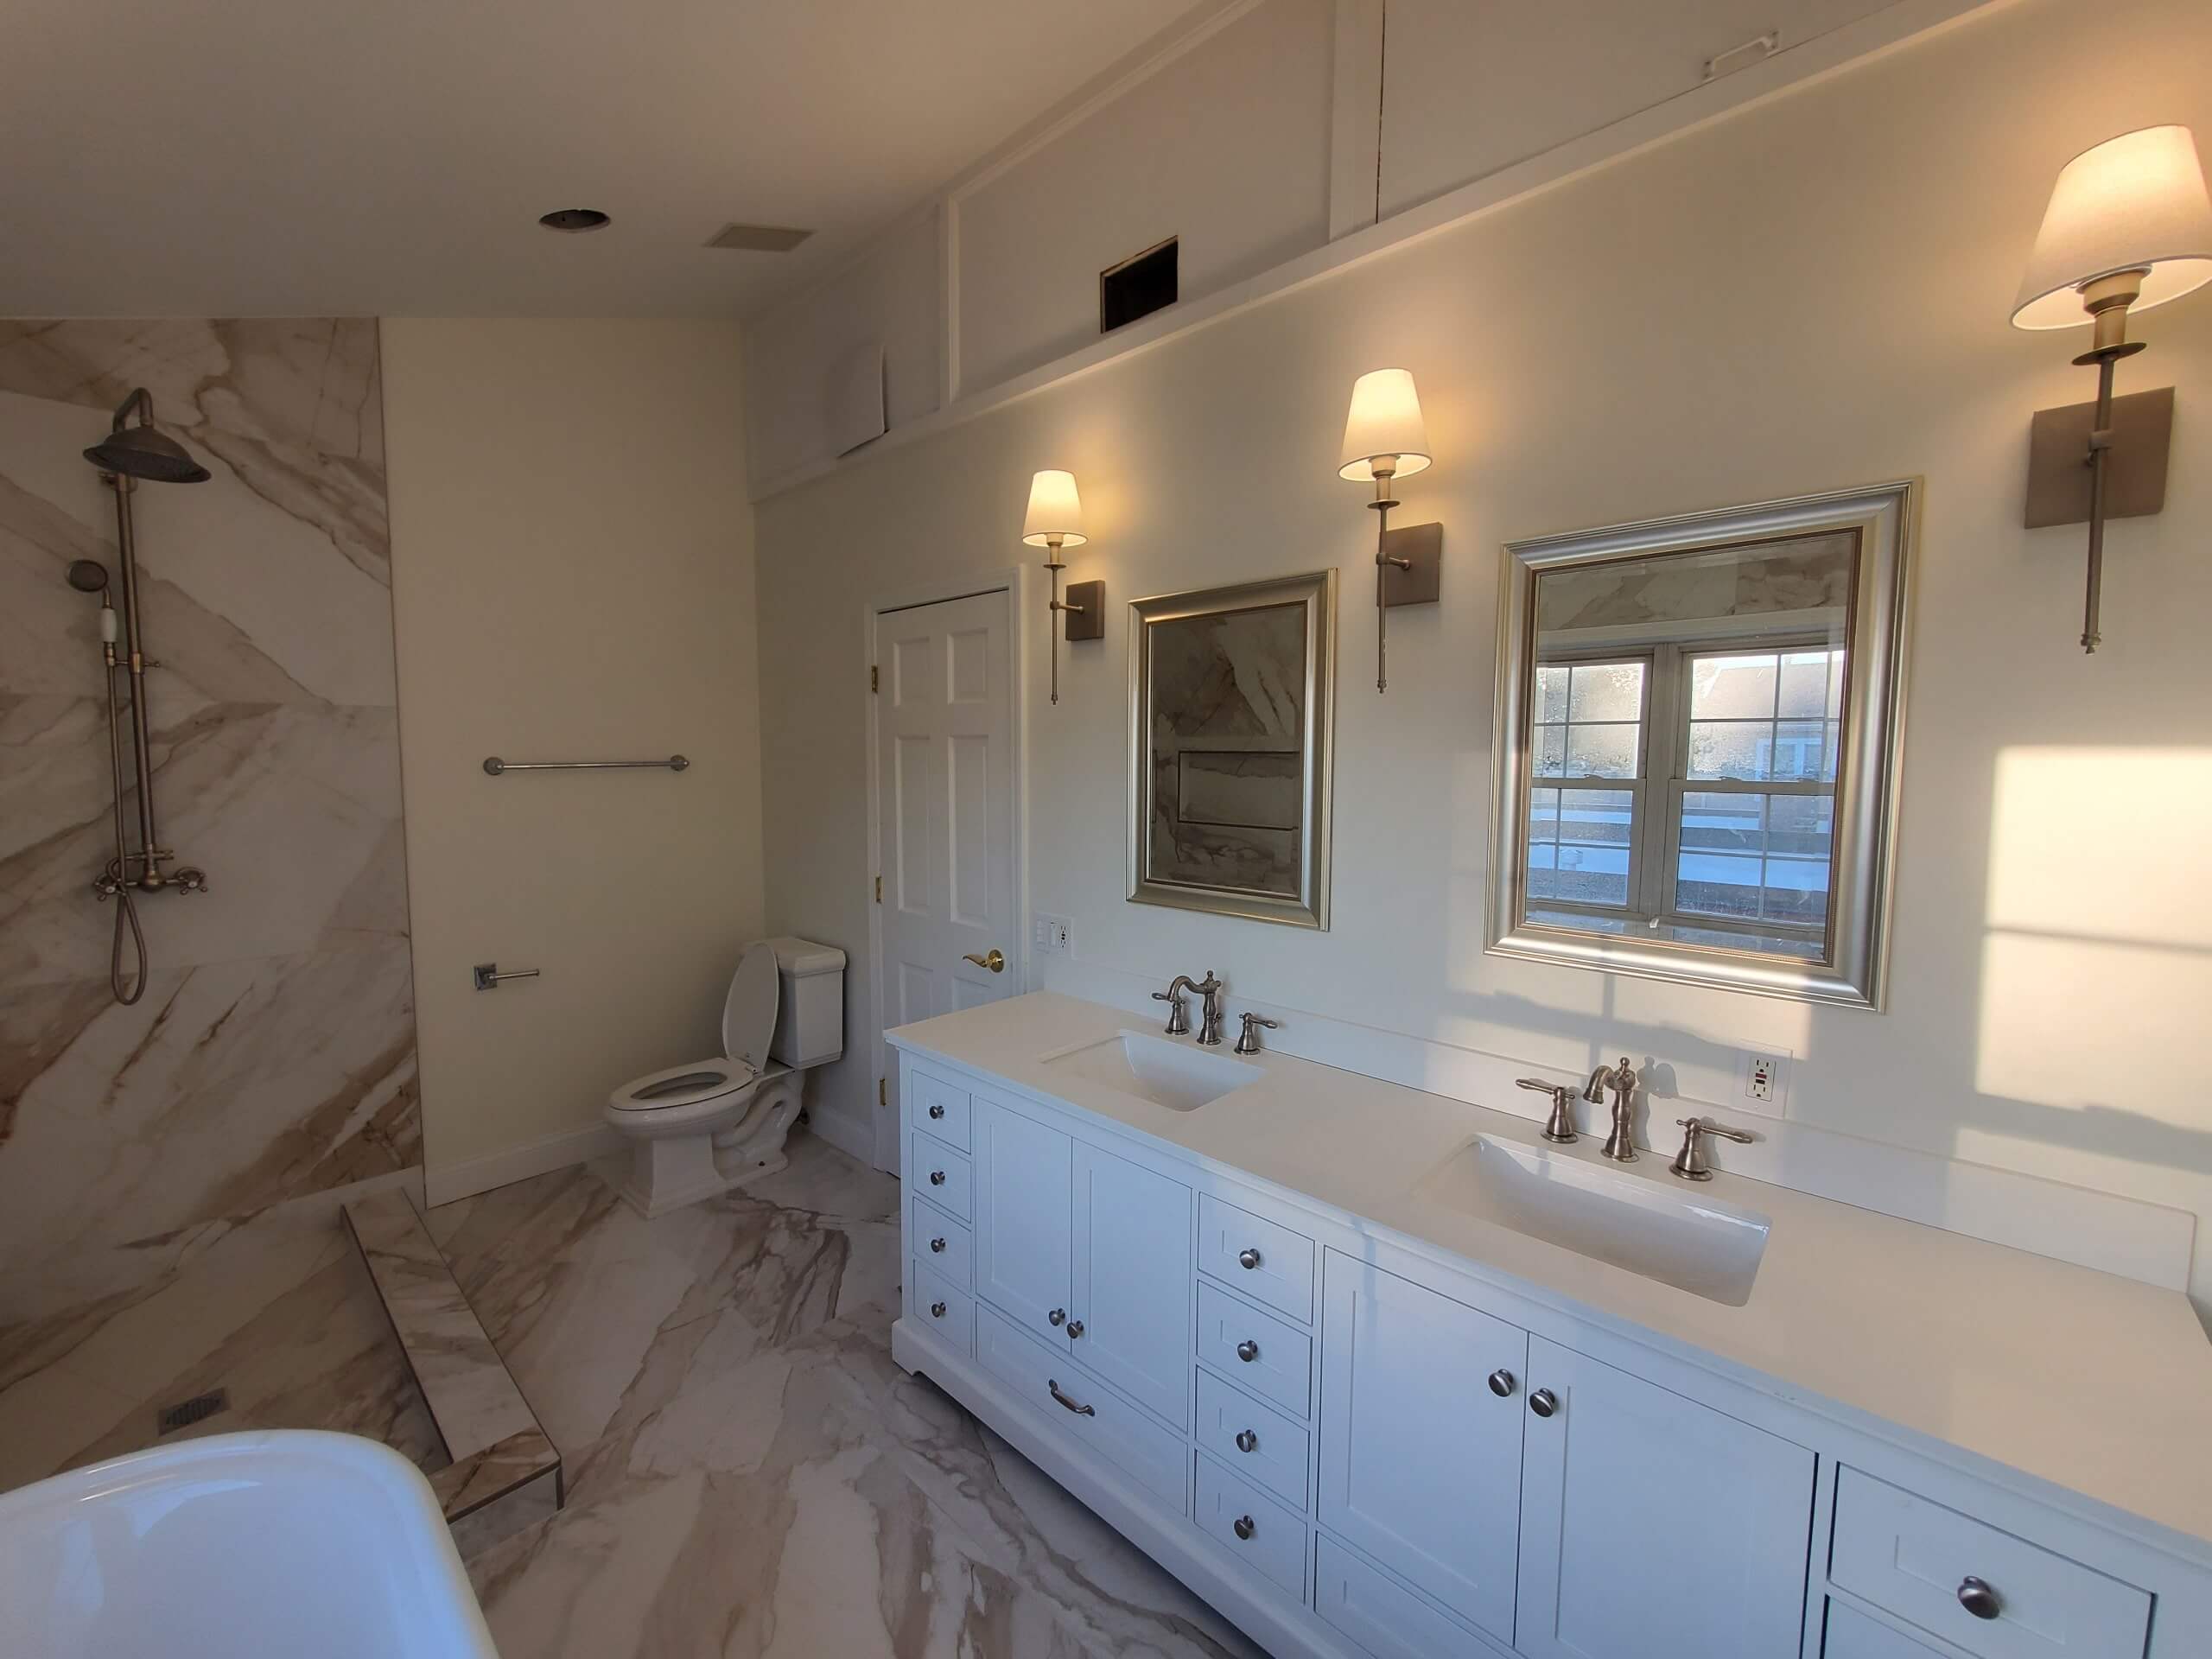 Bathroom designed and built by Red Cardinal